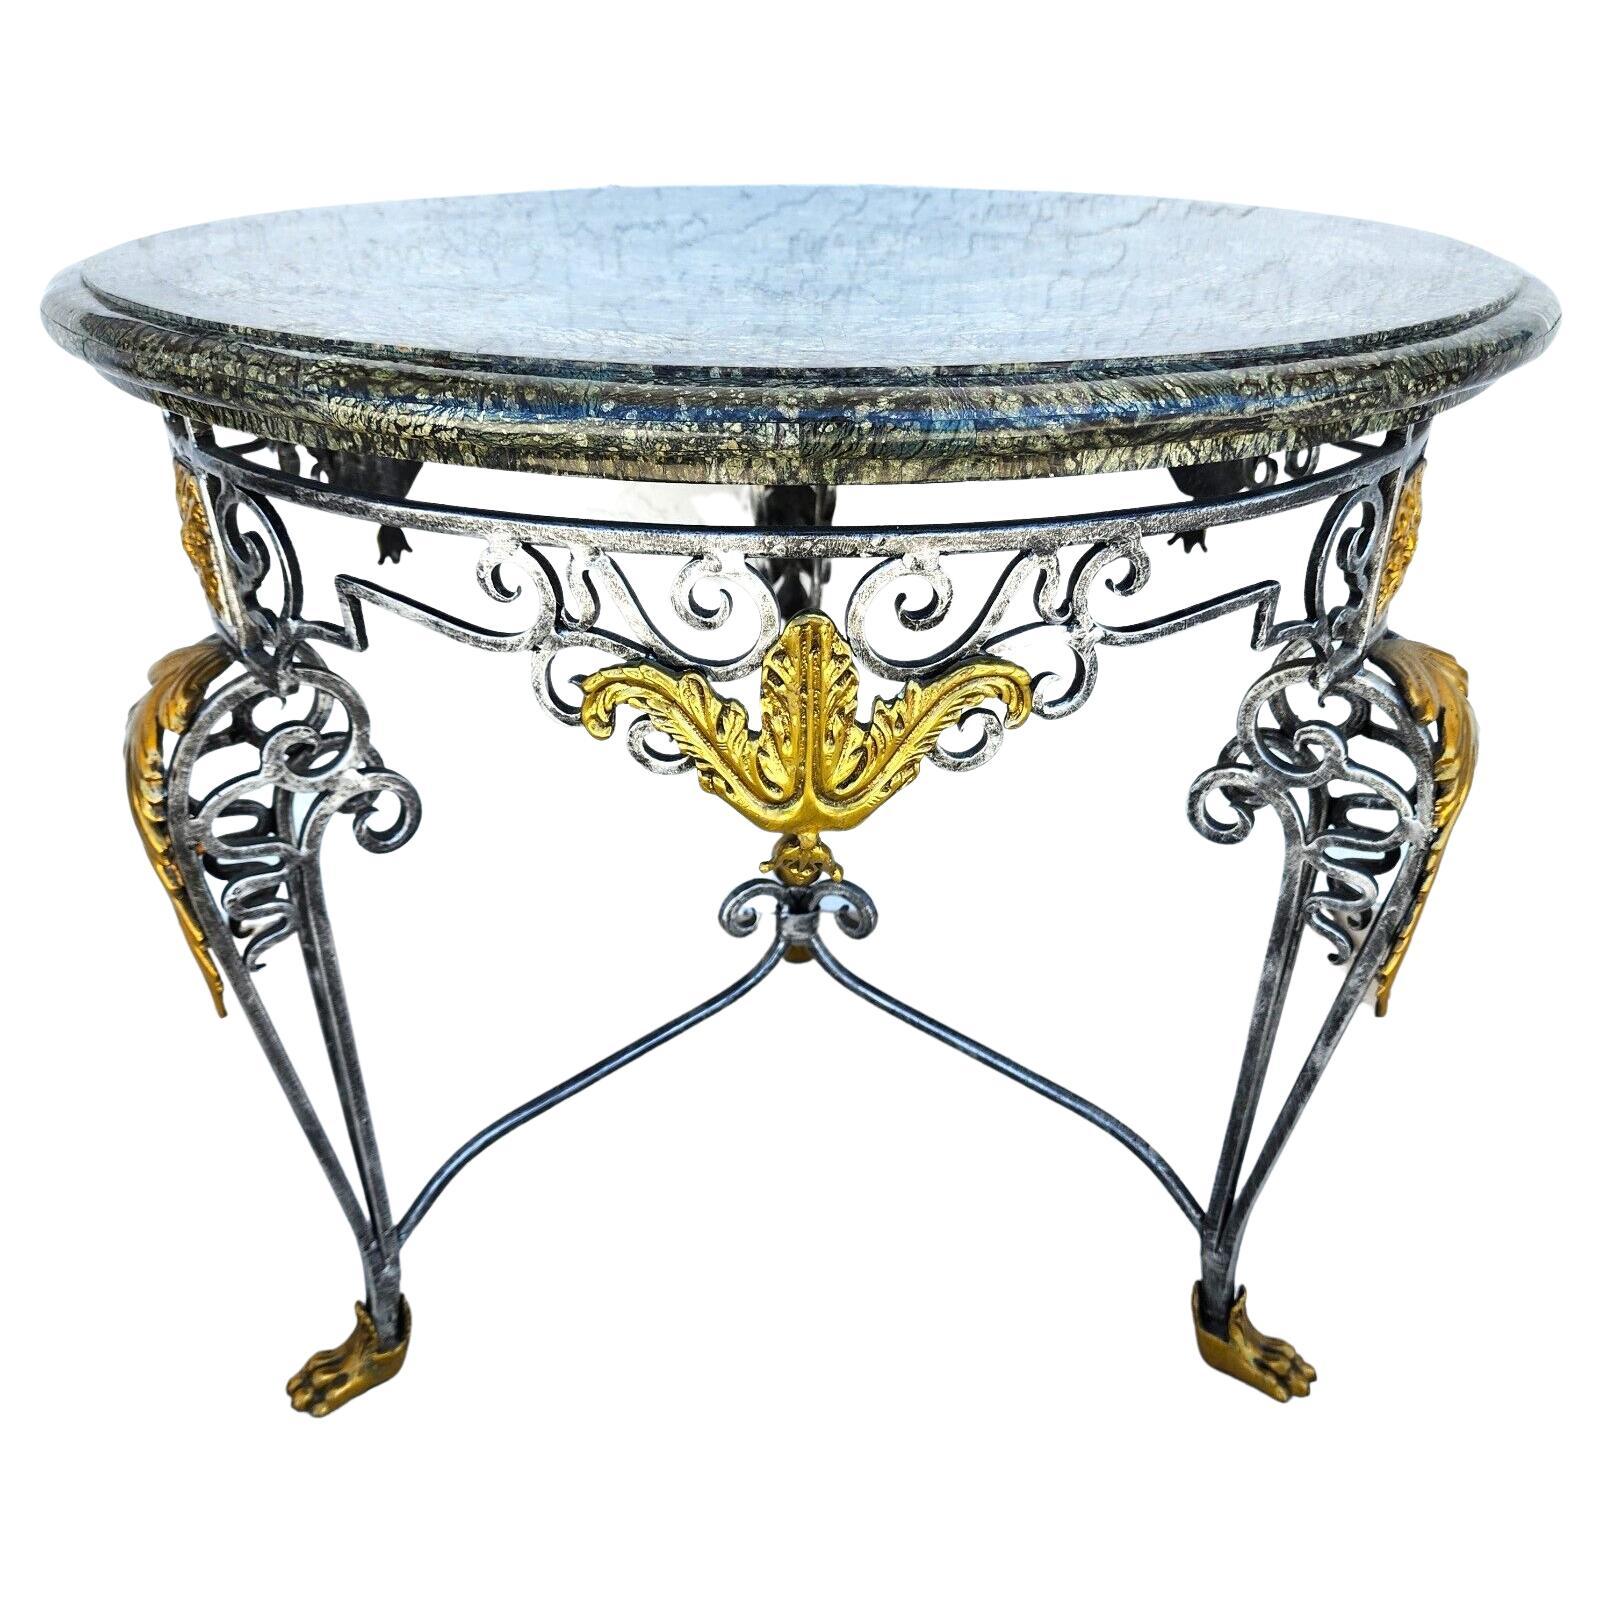 French Side Center Table Louis XV Style by Maitland Smith